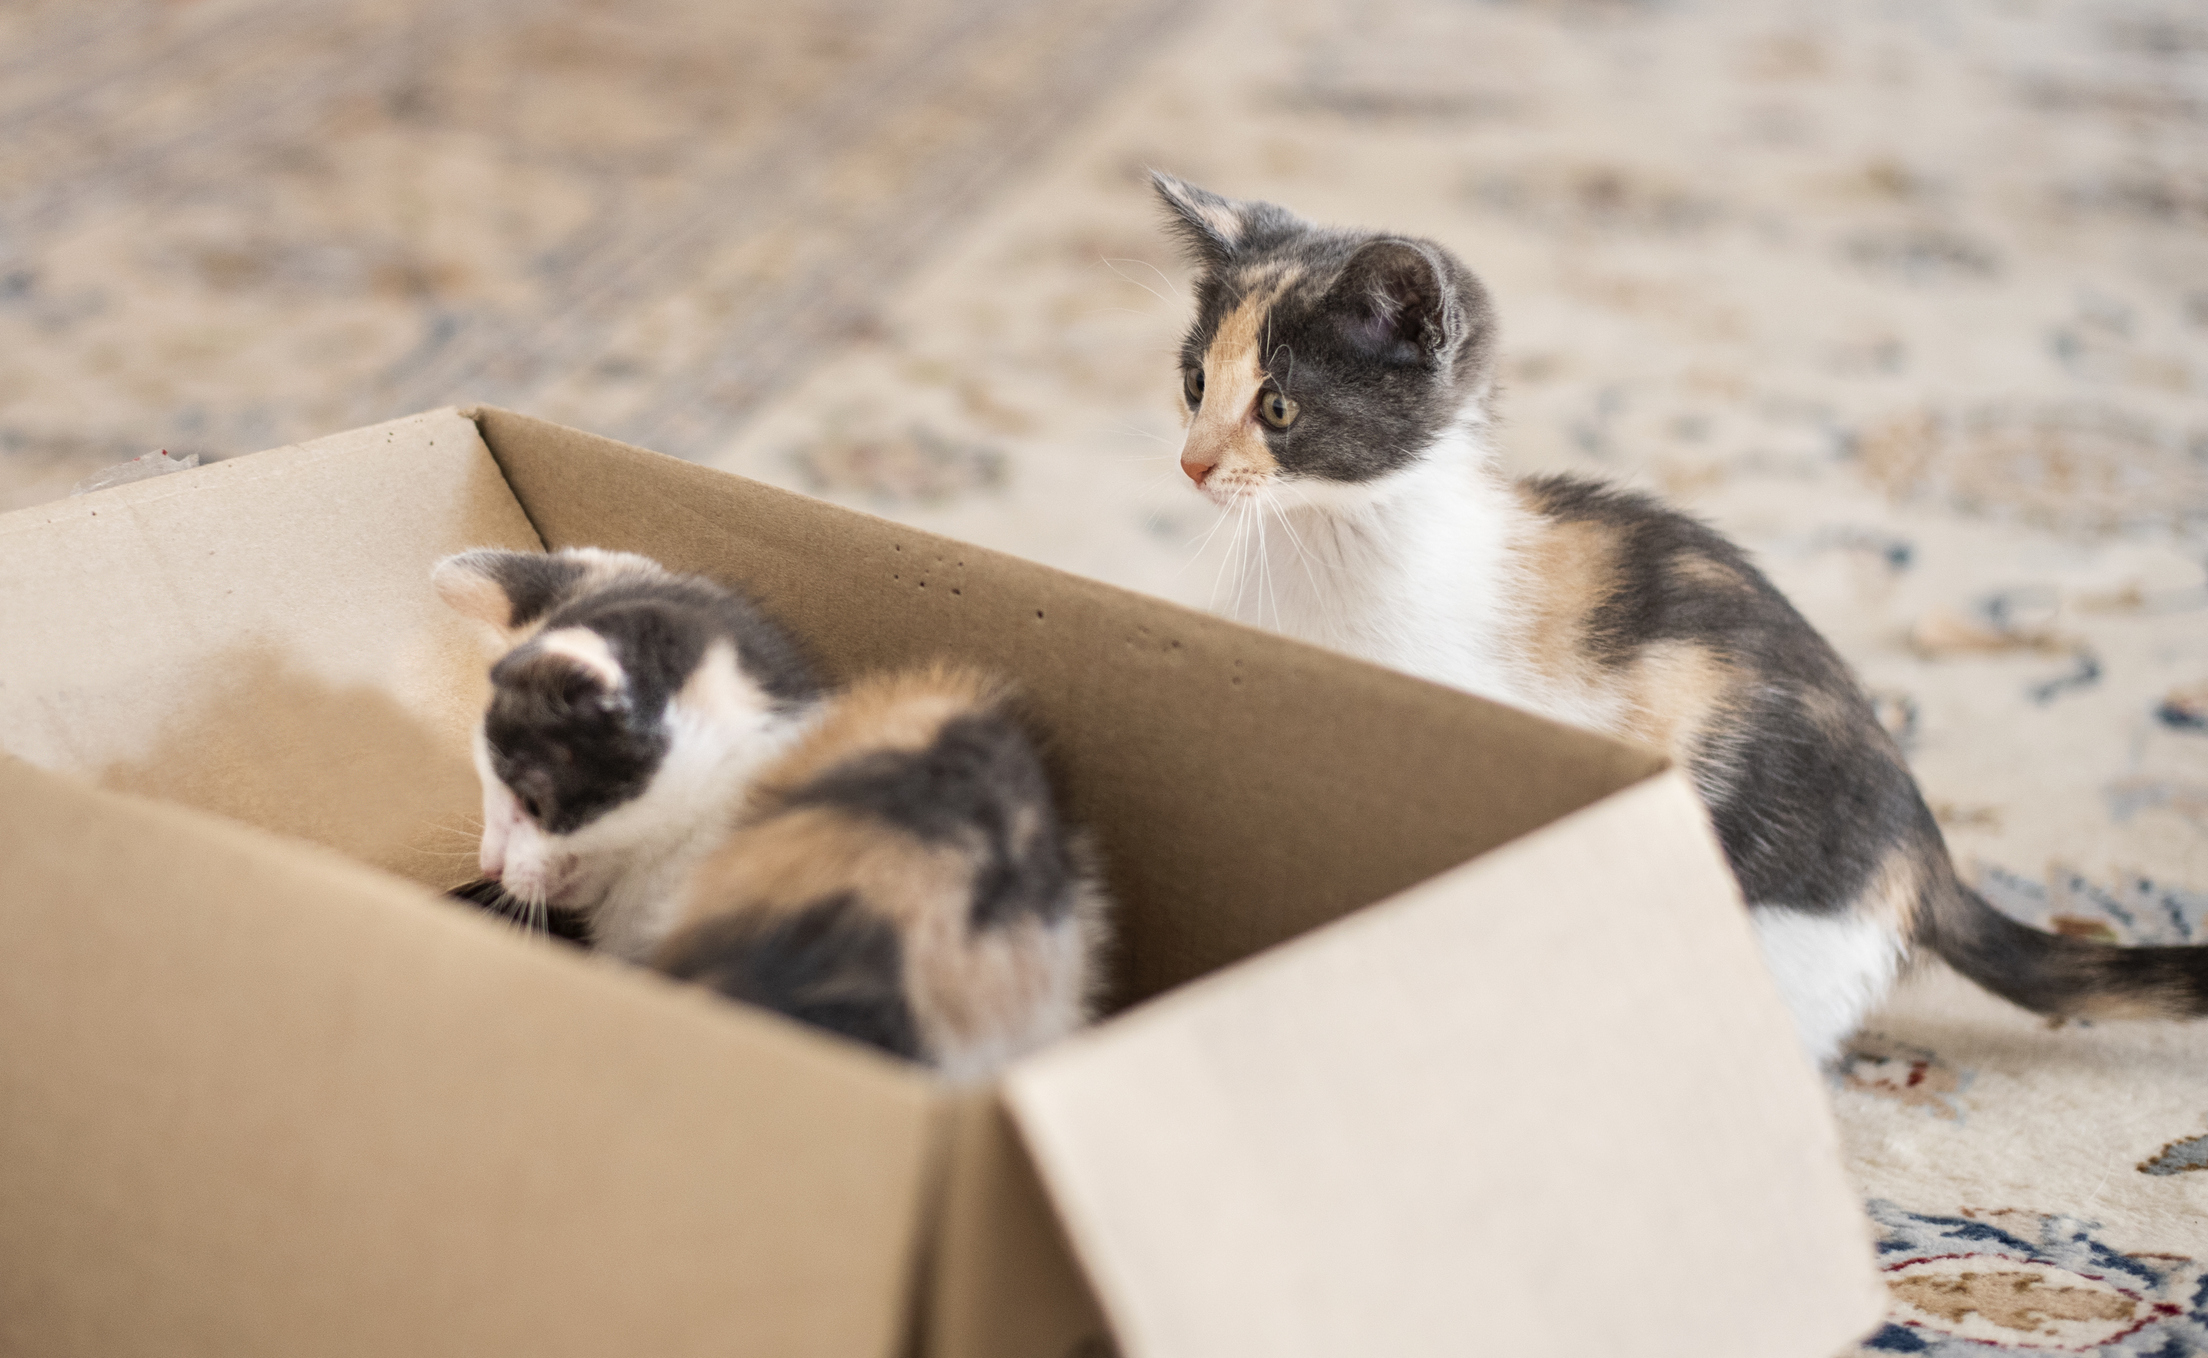 Kittens playing in a cardboard box